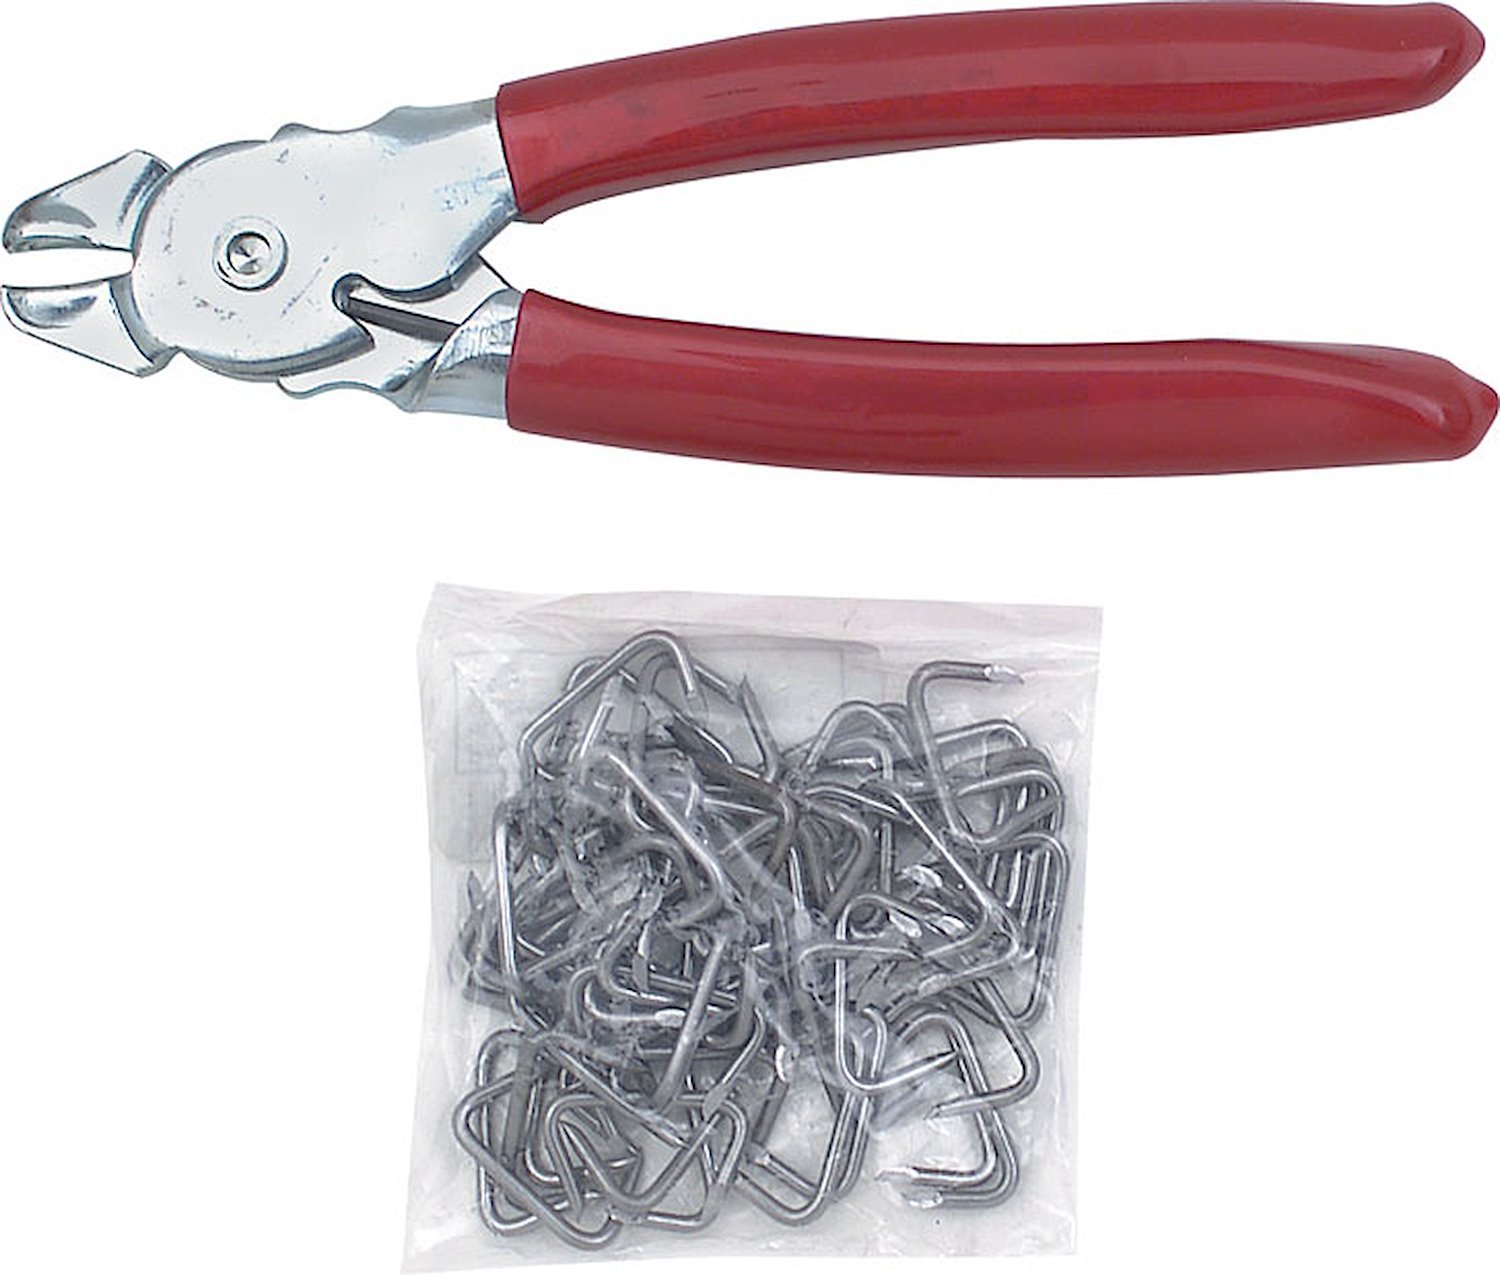 K10010 Upholstery Installation Set With Heavy Duty Pliers and Hog Rings